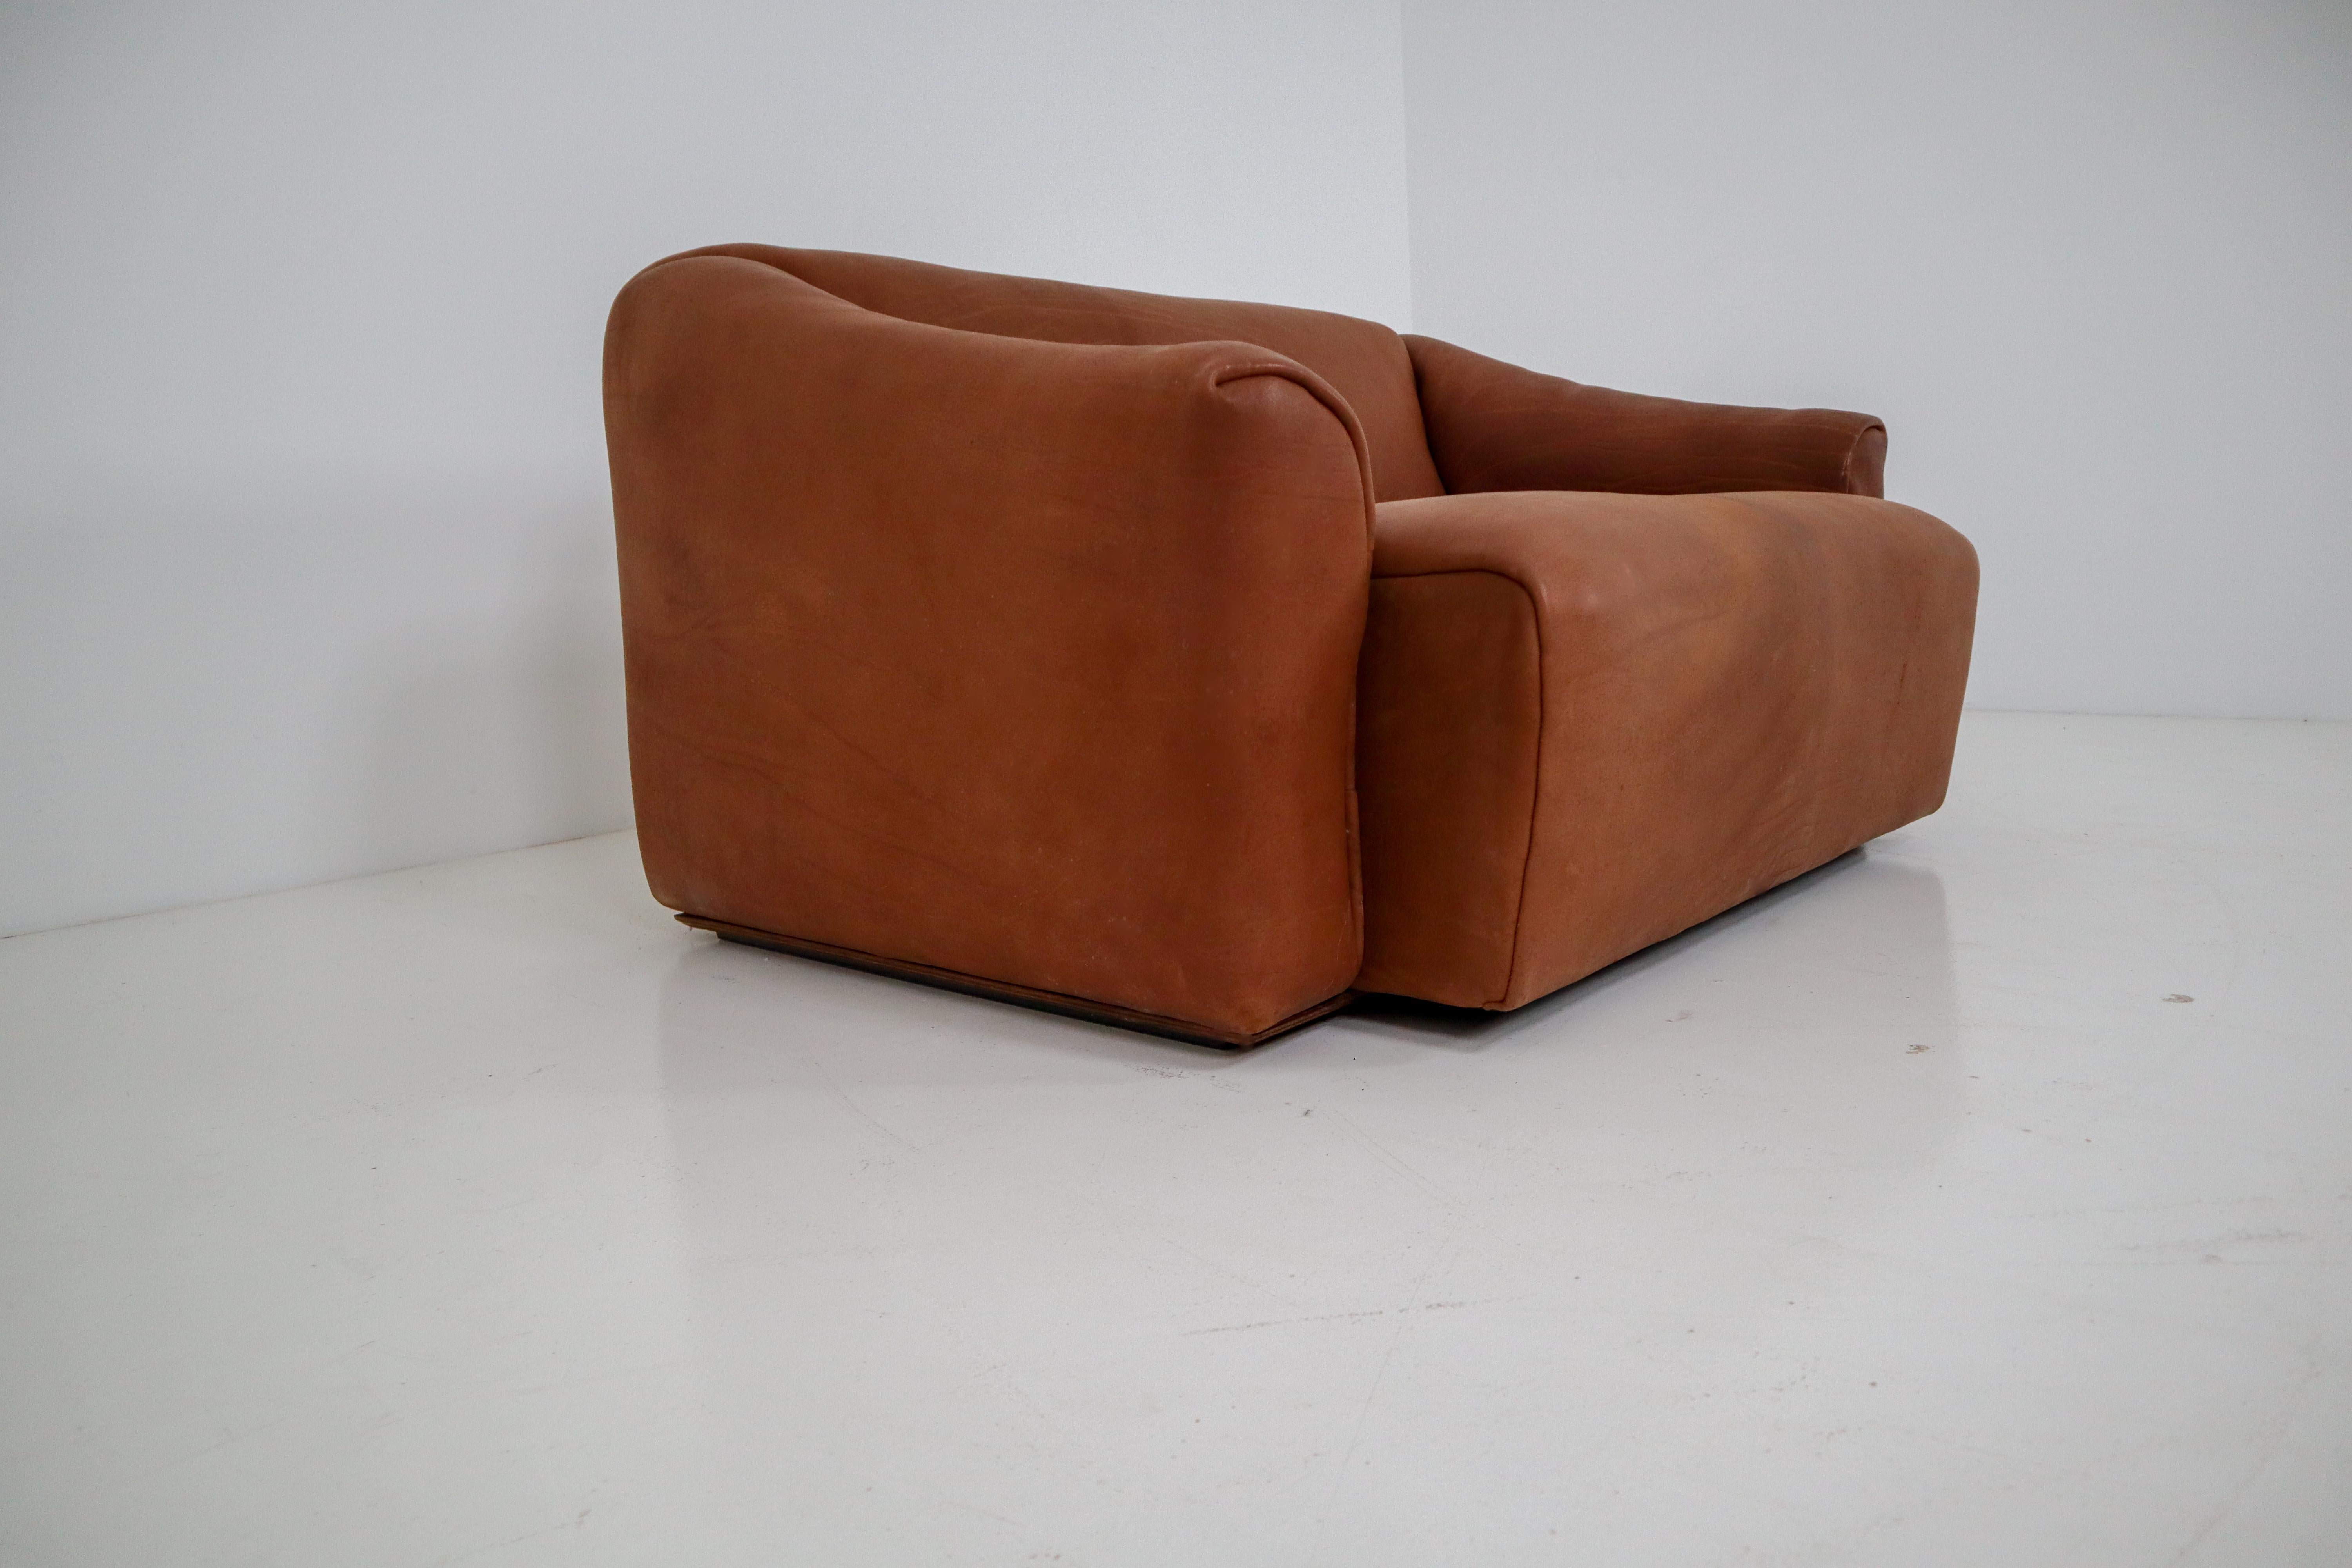 Patinated Cognac Leather 